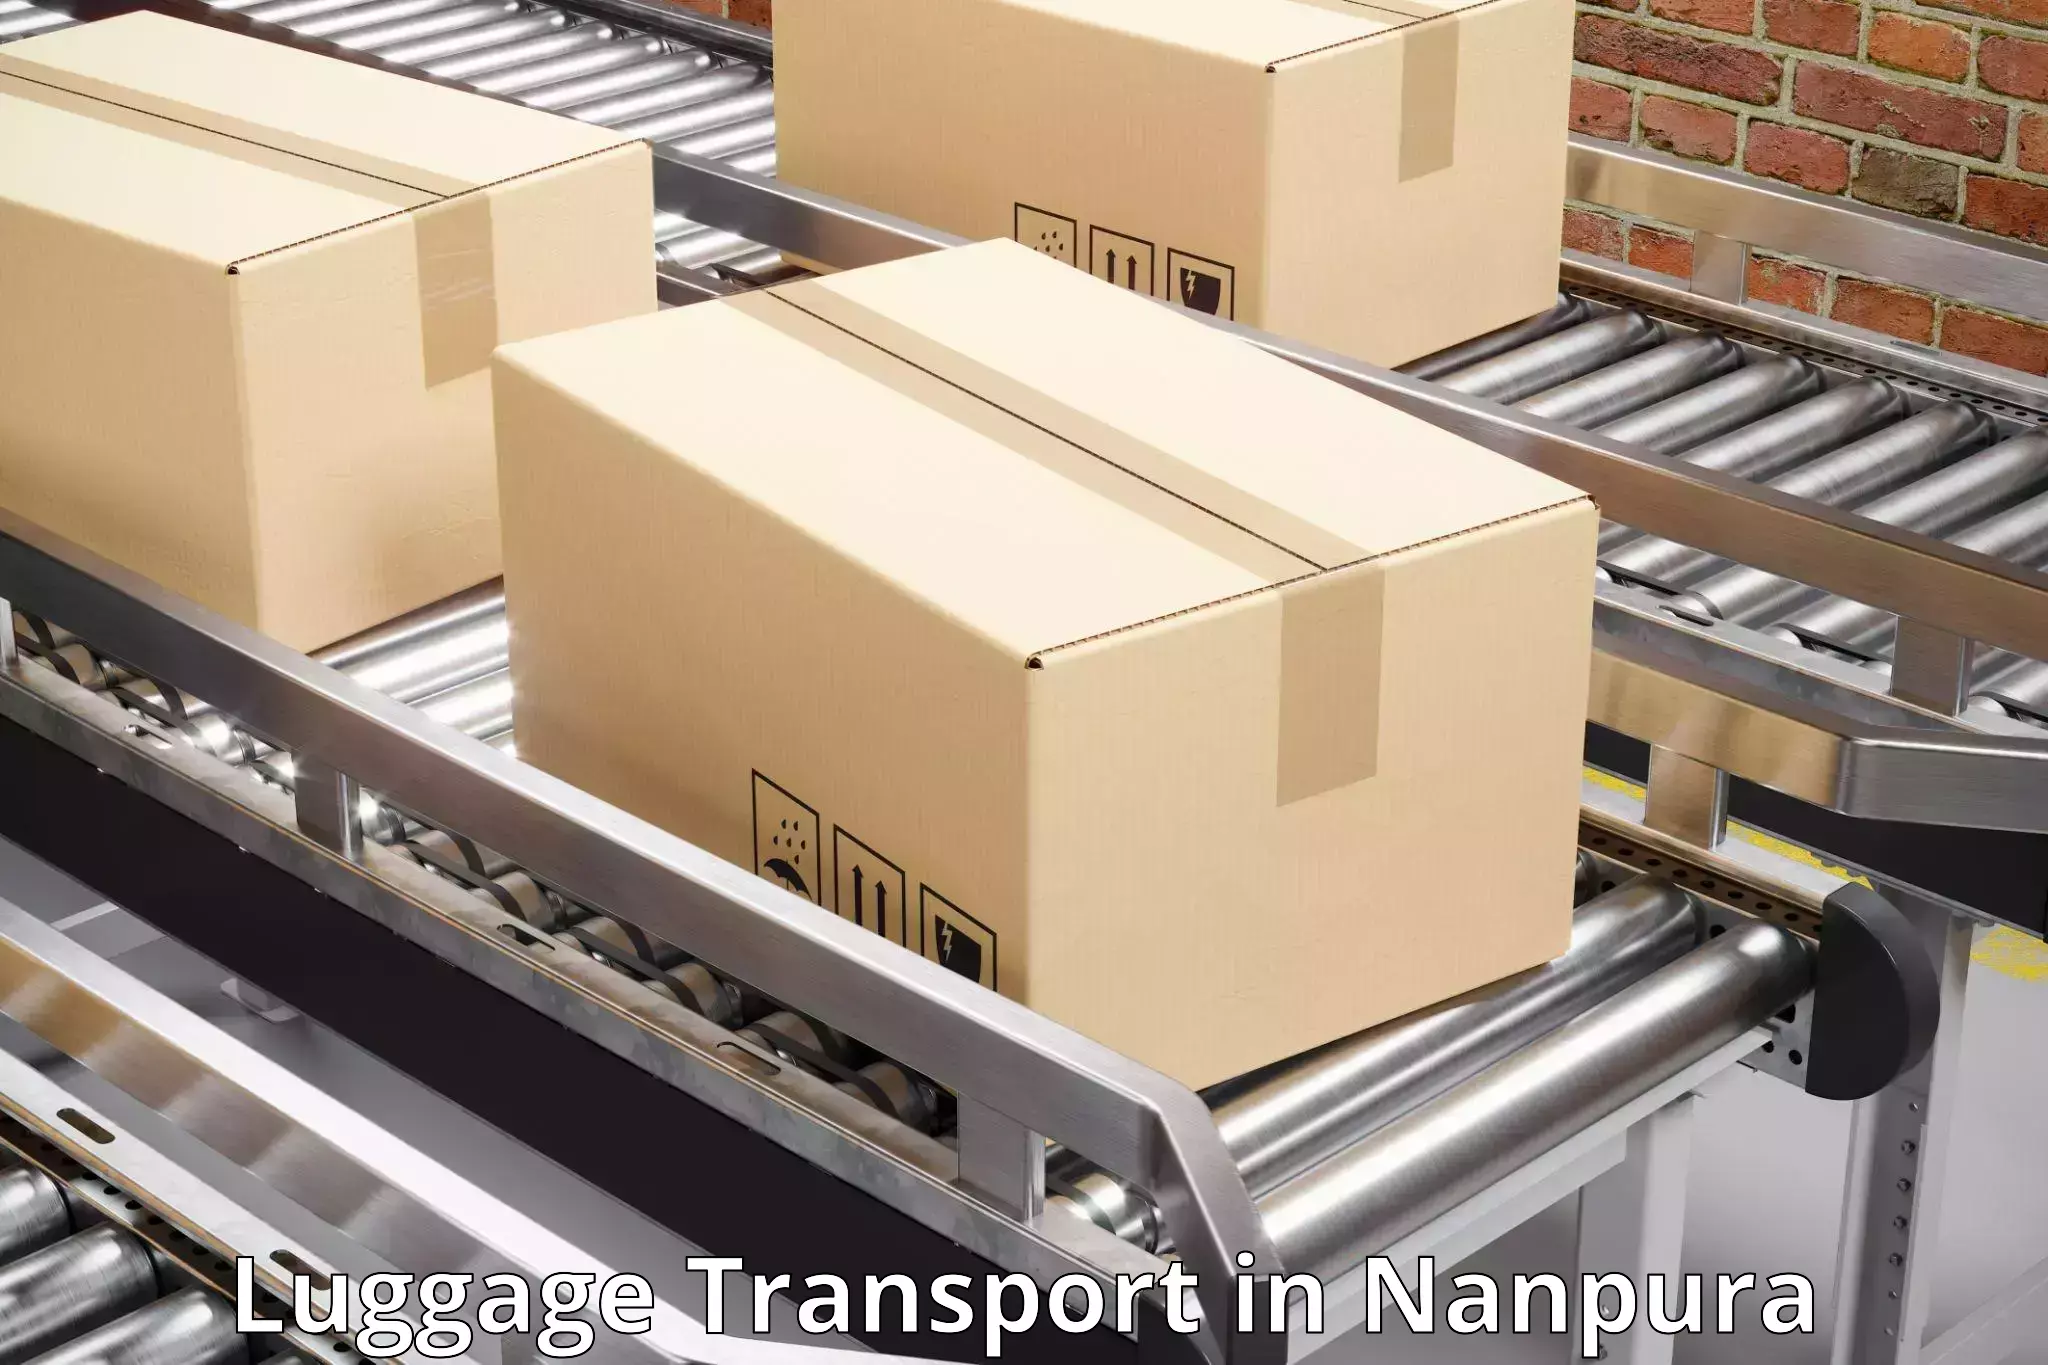 Discounted baggage transport in Nanpura